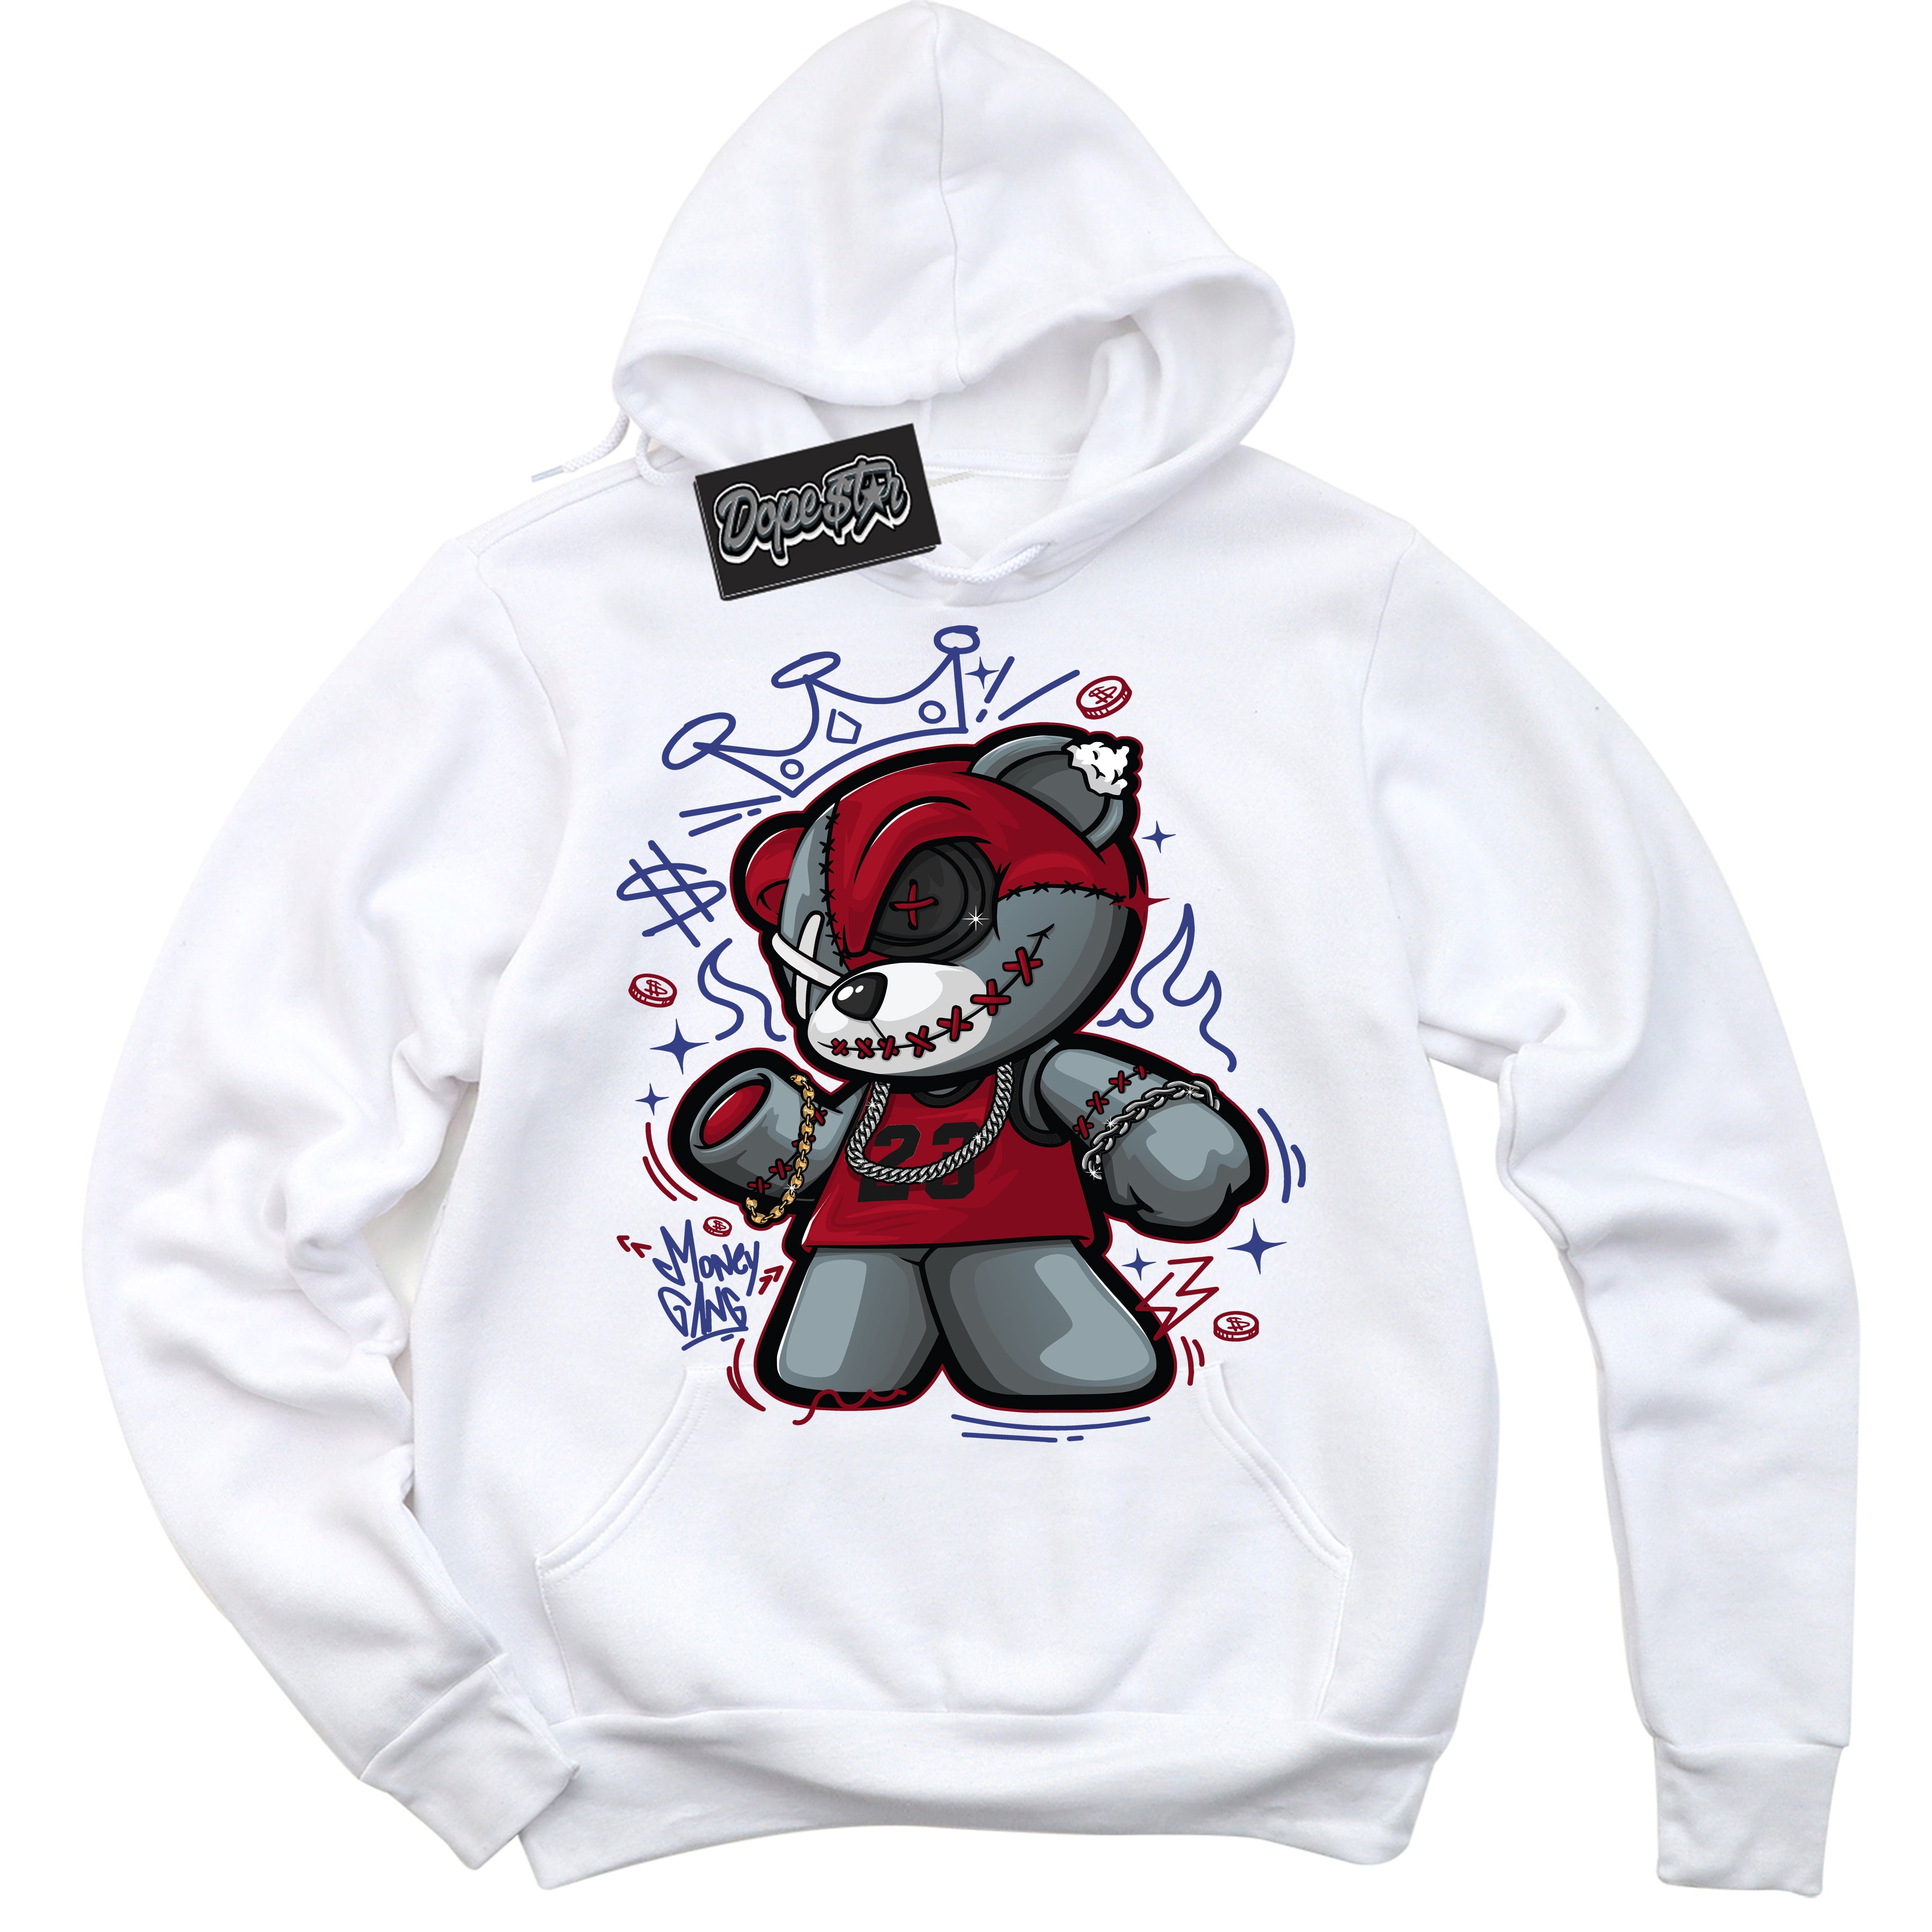 Cool White Hoodie with “ Money Gang Bear ”  design that Perfectly Matches Playoffs 8s Sneakers.